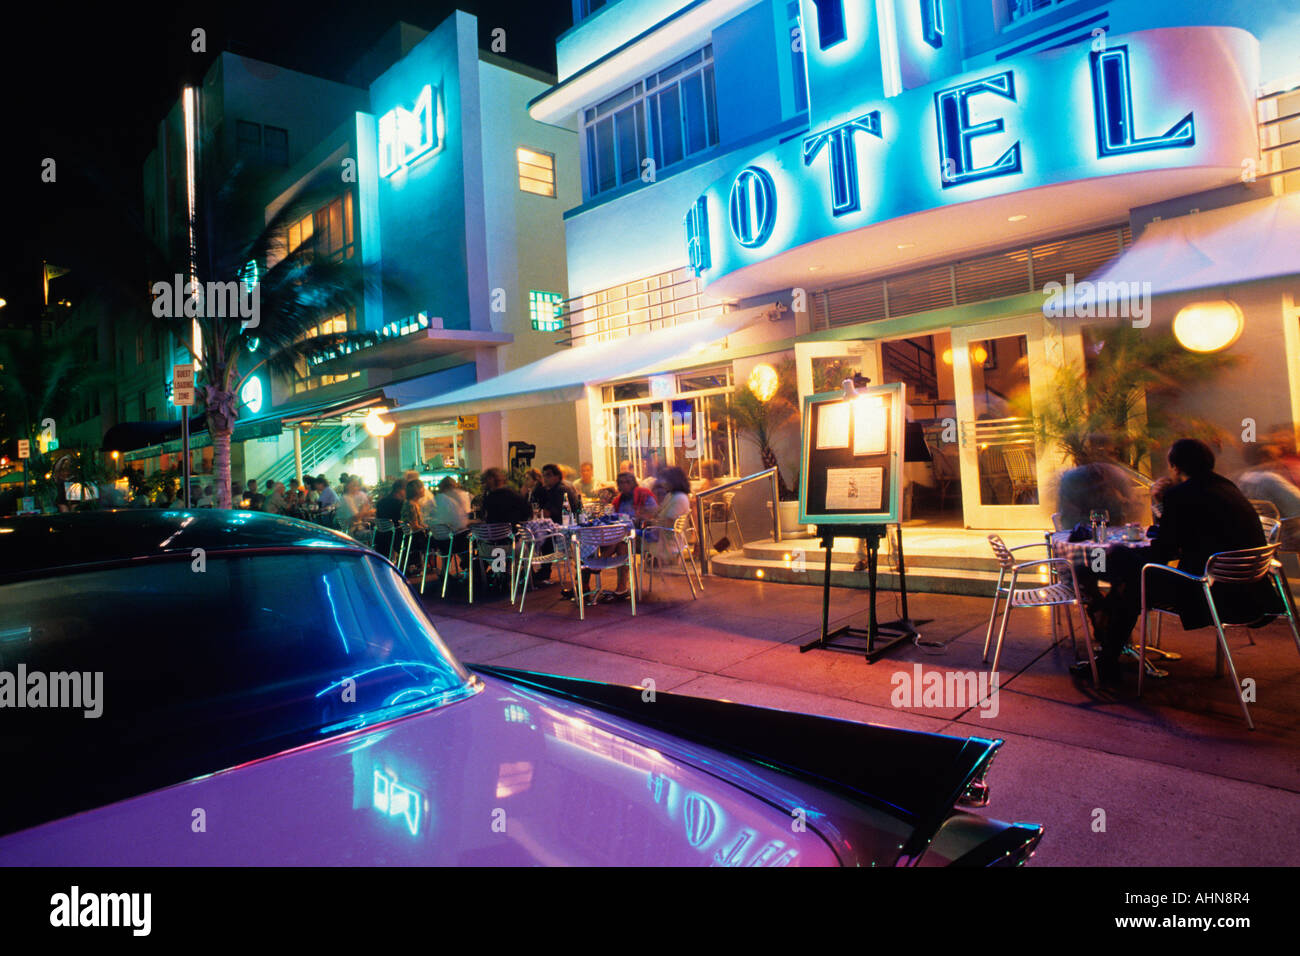 Florida, Miami, South Beach Art Deco. Street at night, neon lights, purple car and people dining on the street in a sidewalk cafe. Stock Photo